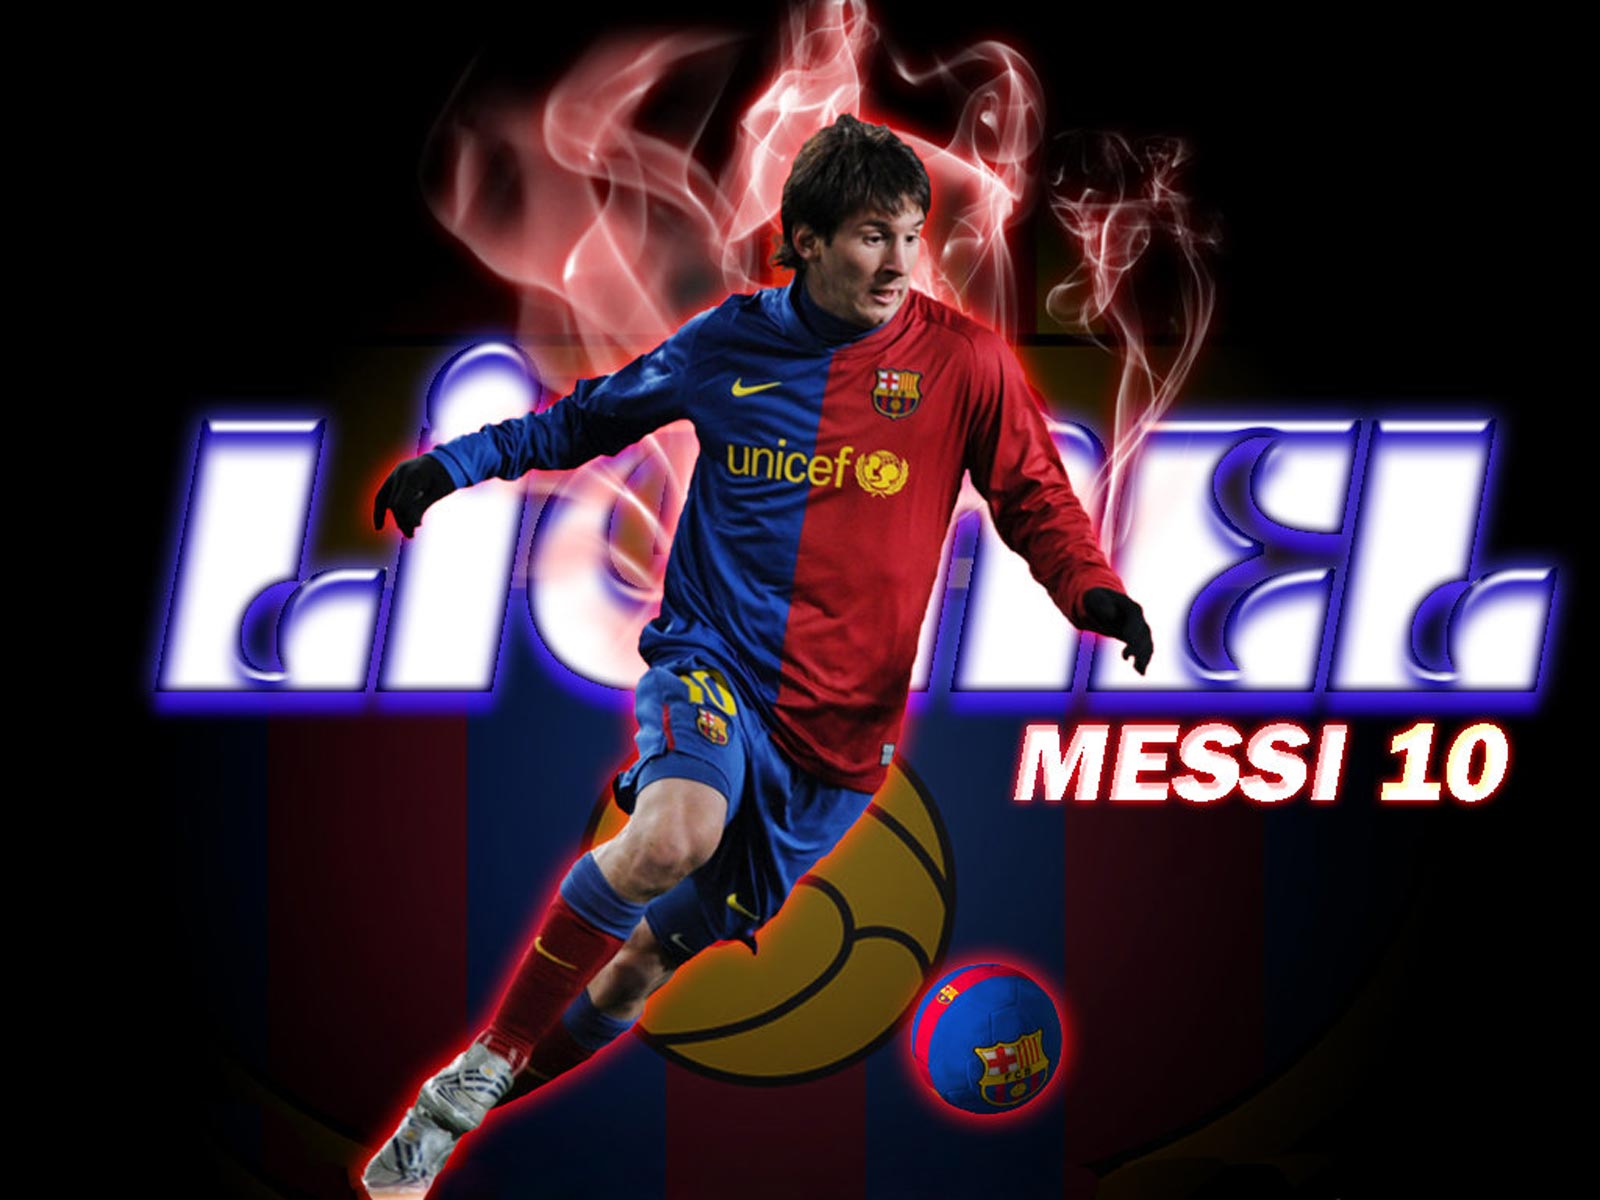 Download Lionel Messi wallpapers 10 soccer wallpaper from the above